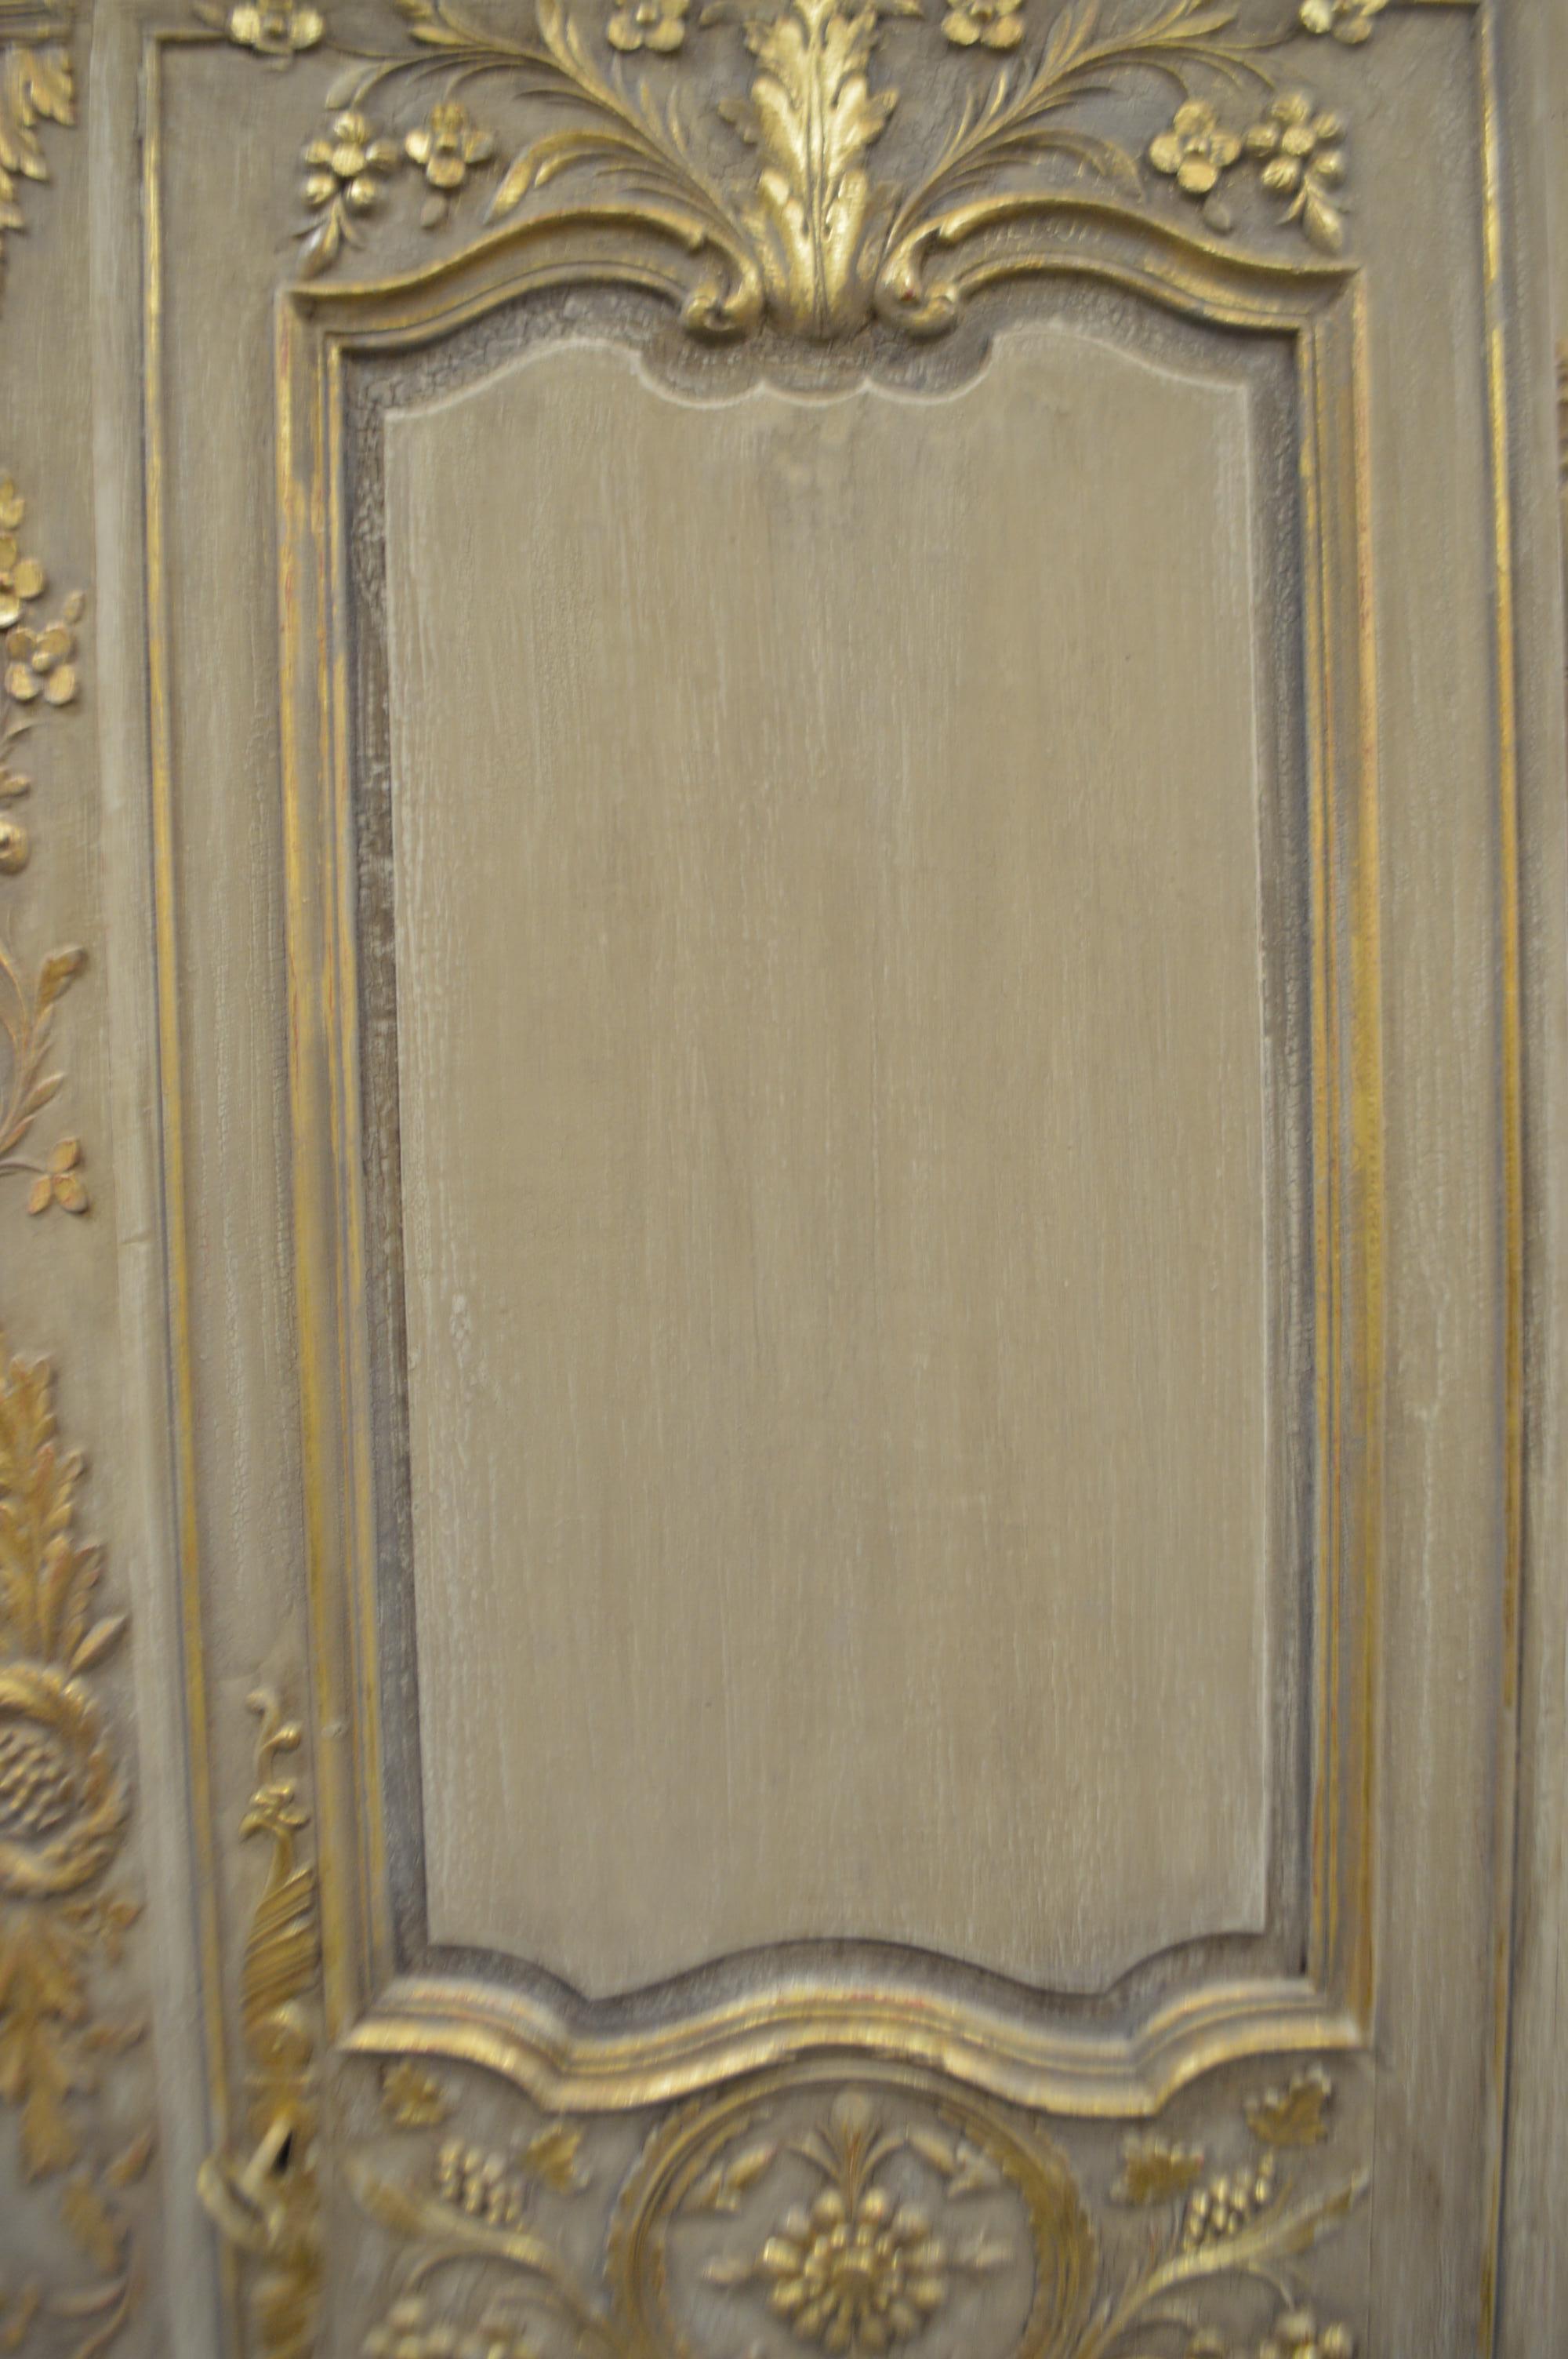 Louis XV Style Highly Decorative Painted Armoire with Gilt Details, 5 Shelves (Patiniert)